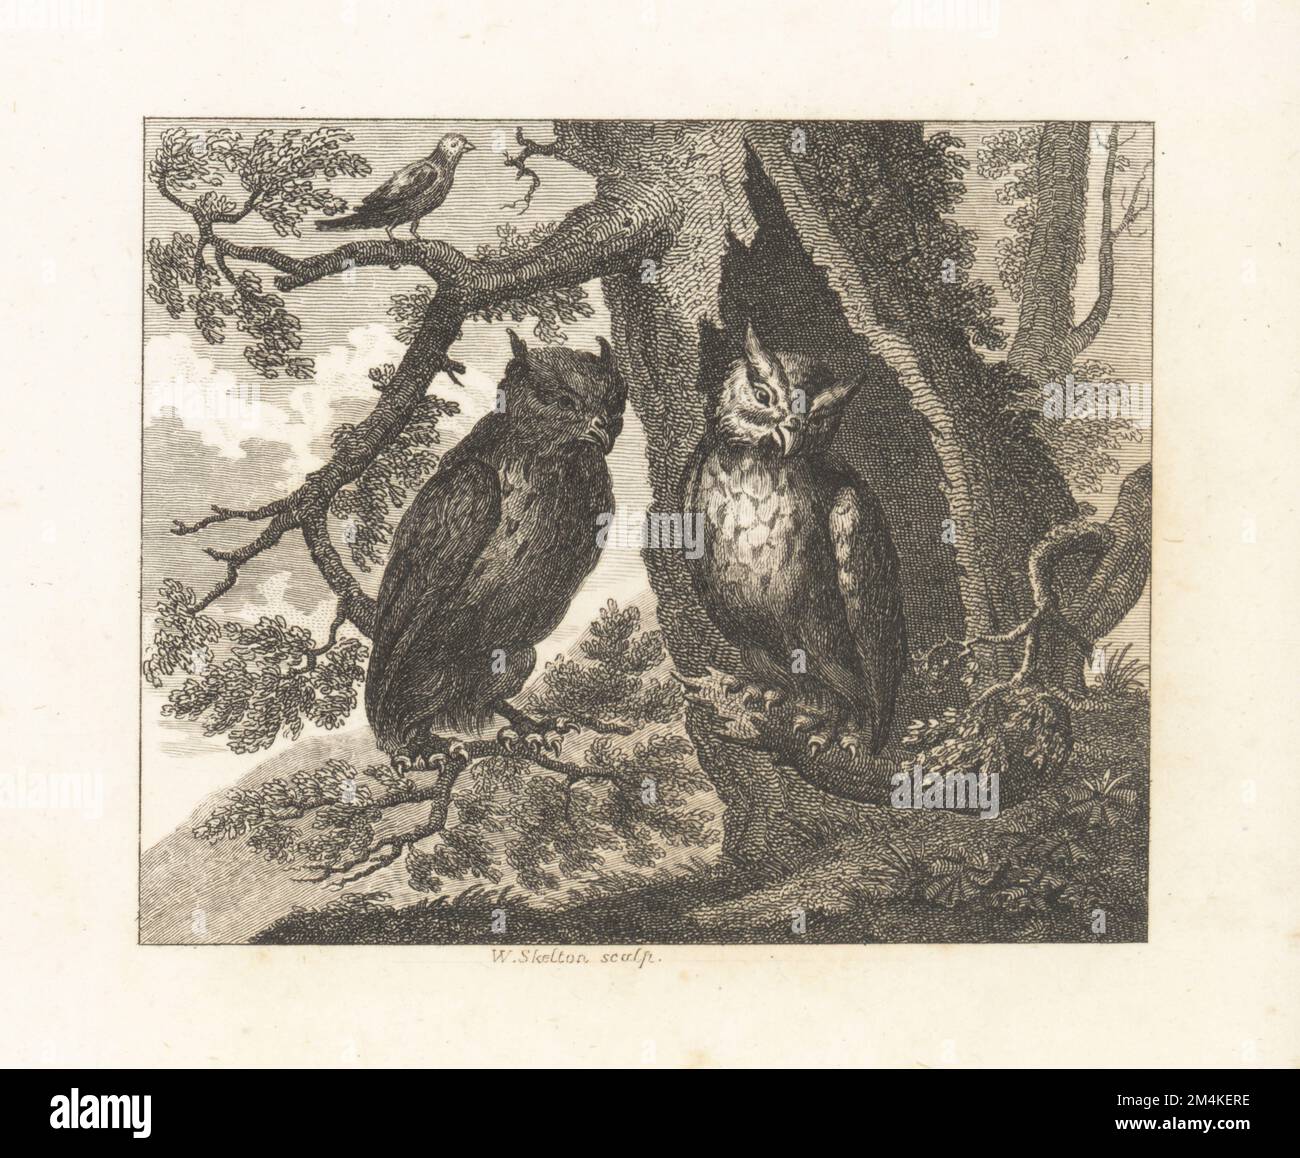 The Two Owls and the Sparrow. A sparrow on a tree branch berates two owls for their arrogance and pride. Copperplate engraving by William Skelton from Fables by John Gay, with a Life of the Author, John Stockdale, London, 1793. Stock Photo